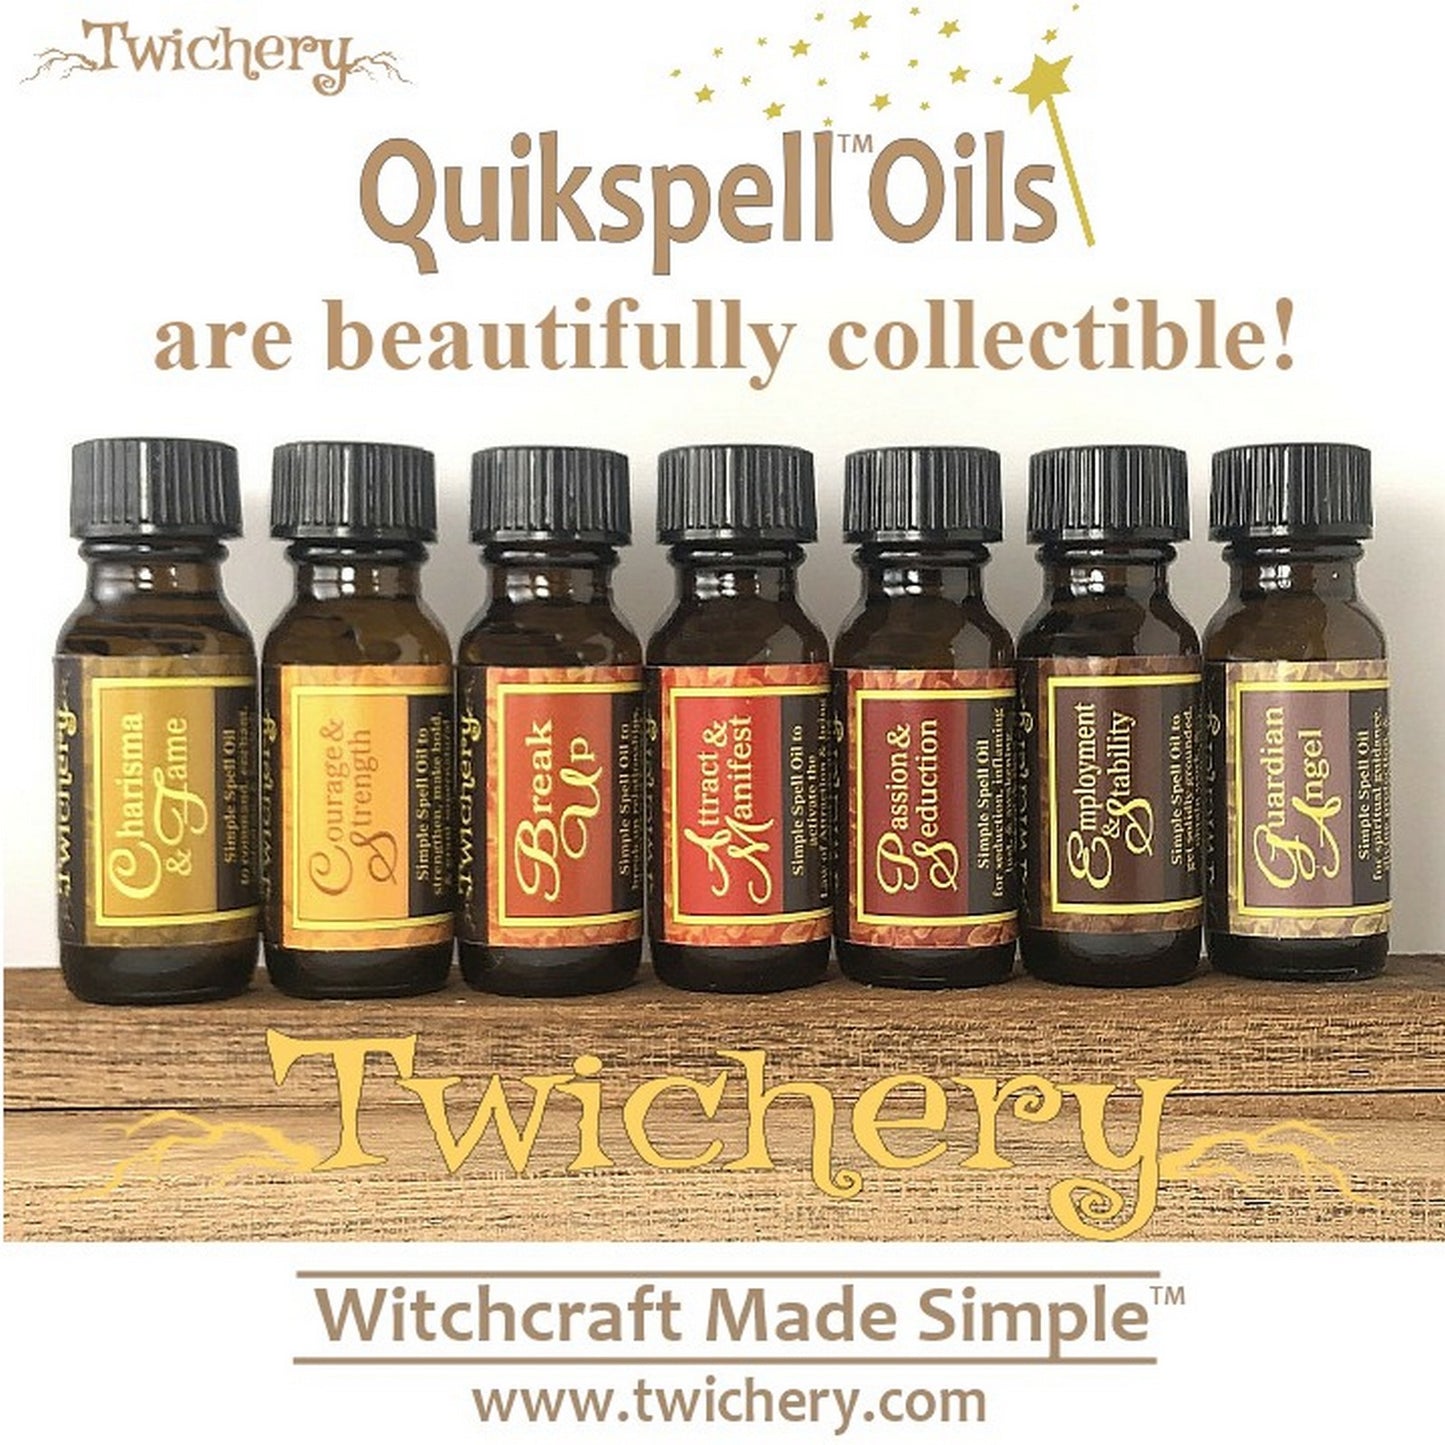 Collect all 24 Twichery Quikspell Oils for all your magickal needs, including our Quikspell Psychic Enhancement Blend! Hoodoo, Voodoo, Wicca, Witchcraft Made Simple